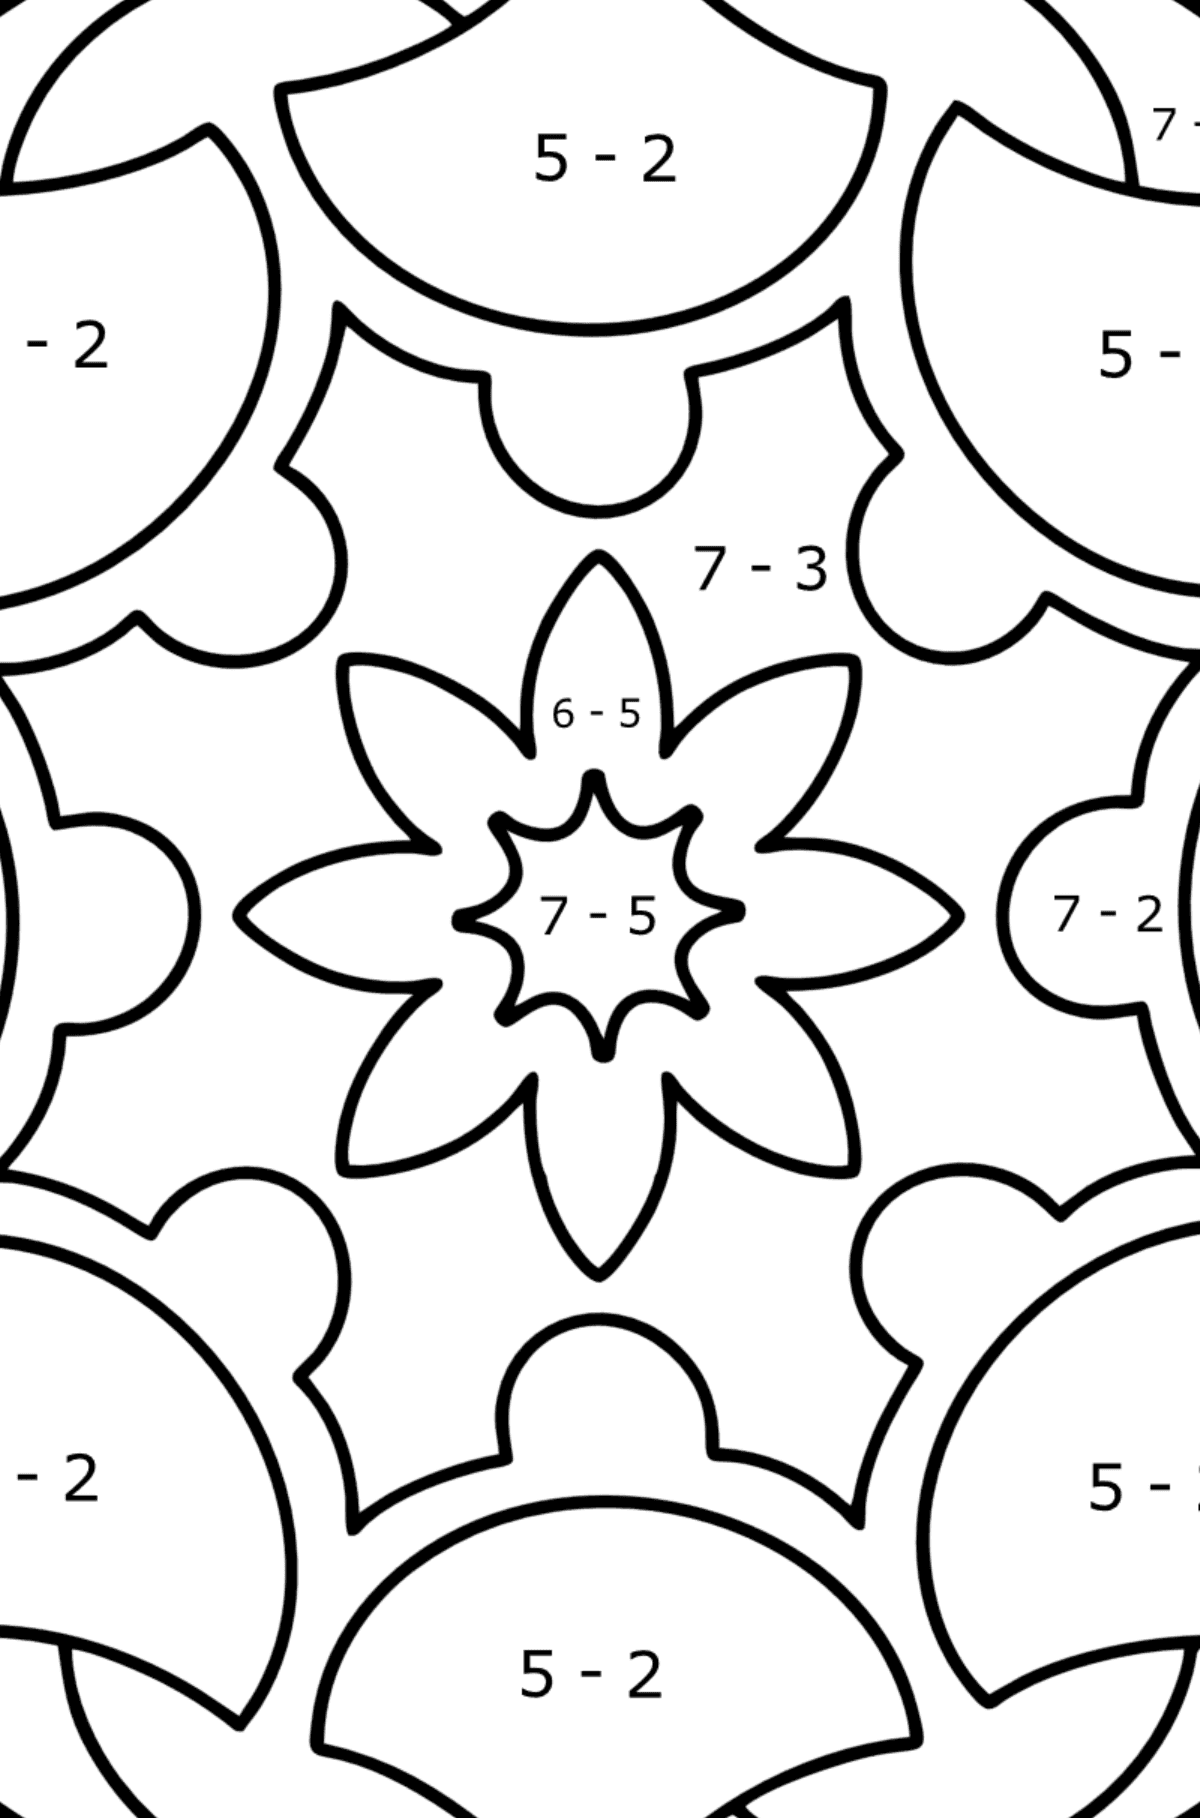 Mandala coloring page - 13 elements - Math Coloring - Subtraction for Kids